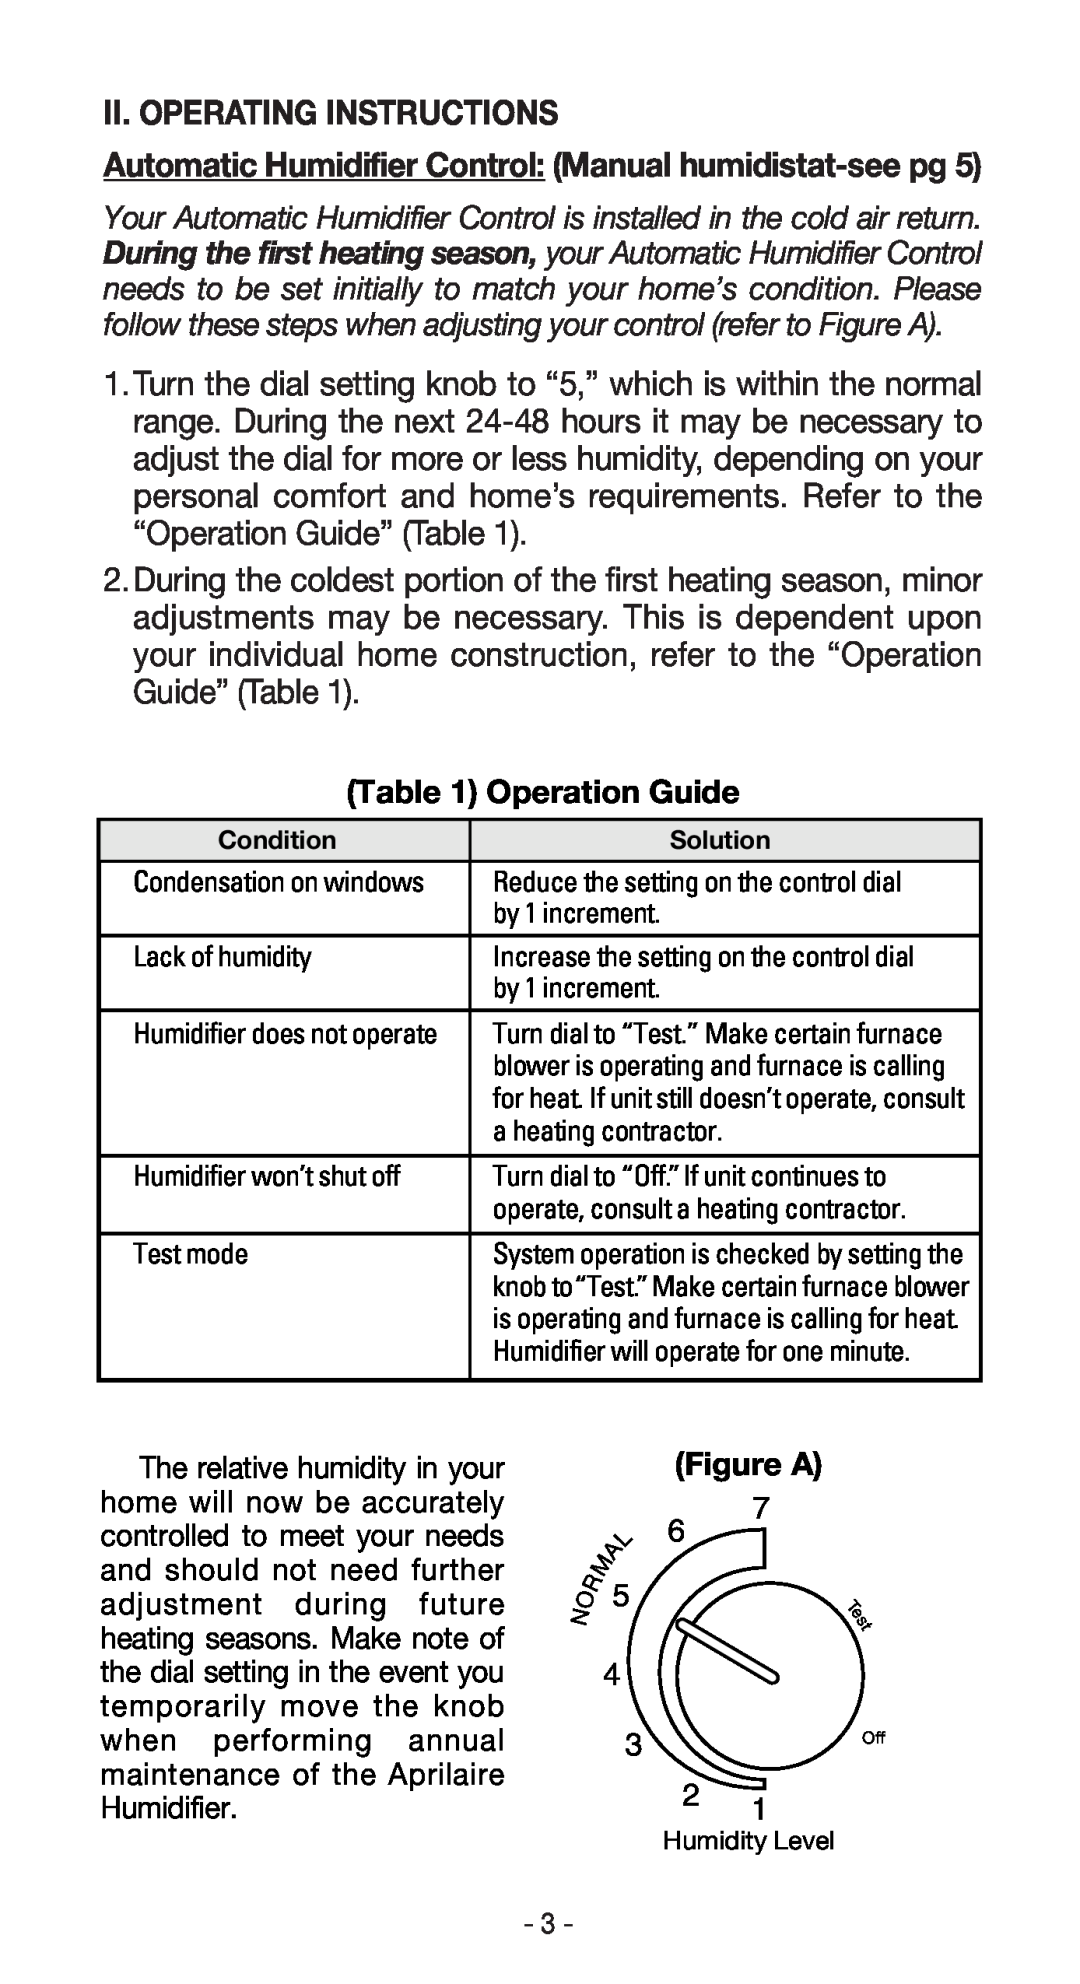 Aprilaire 560, 350, 360, 760, 445, 440, 220, 112, 768, 224 owner manual Ii. Operating Instructions, Operation Guide, Figure A 